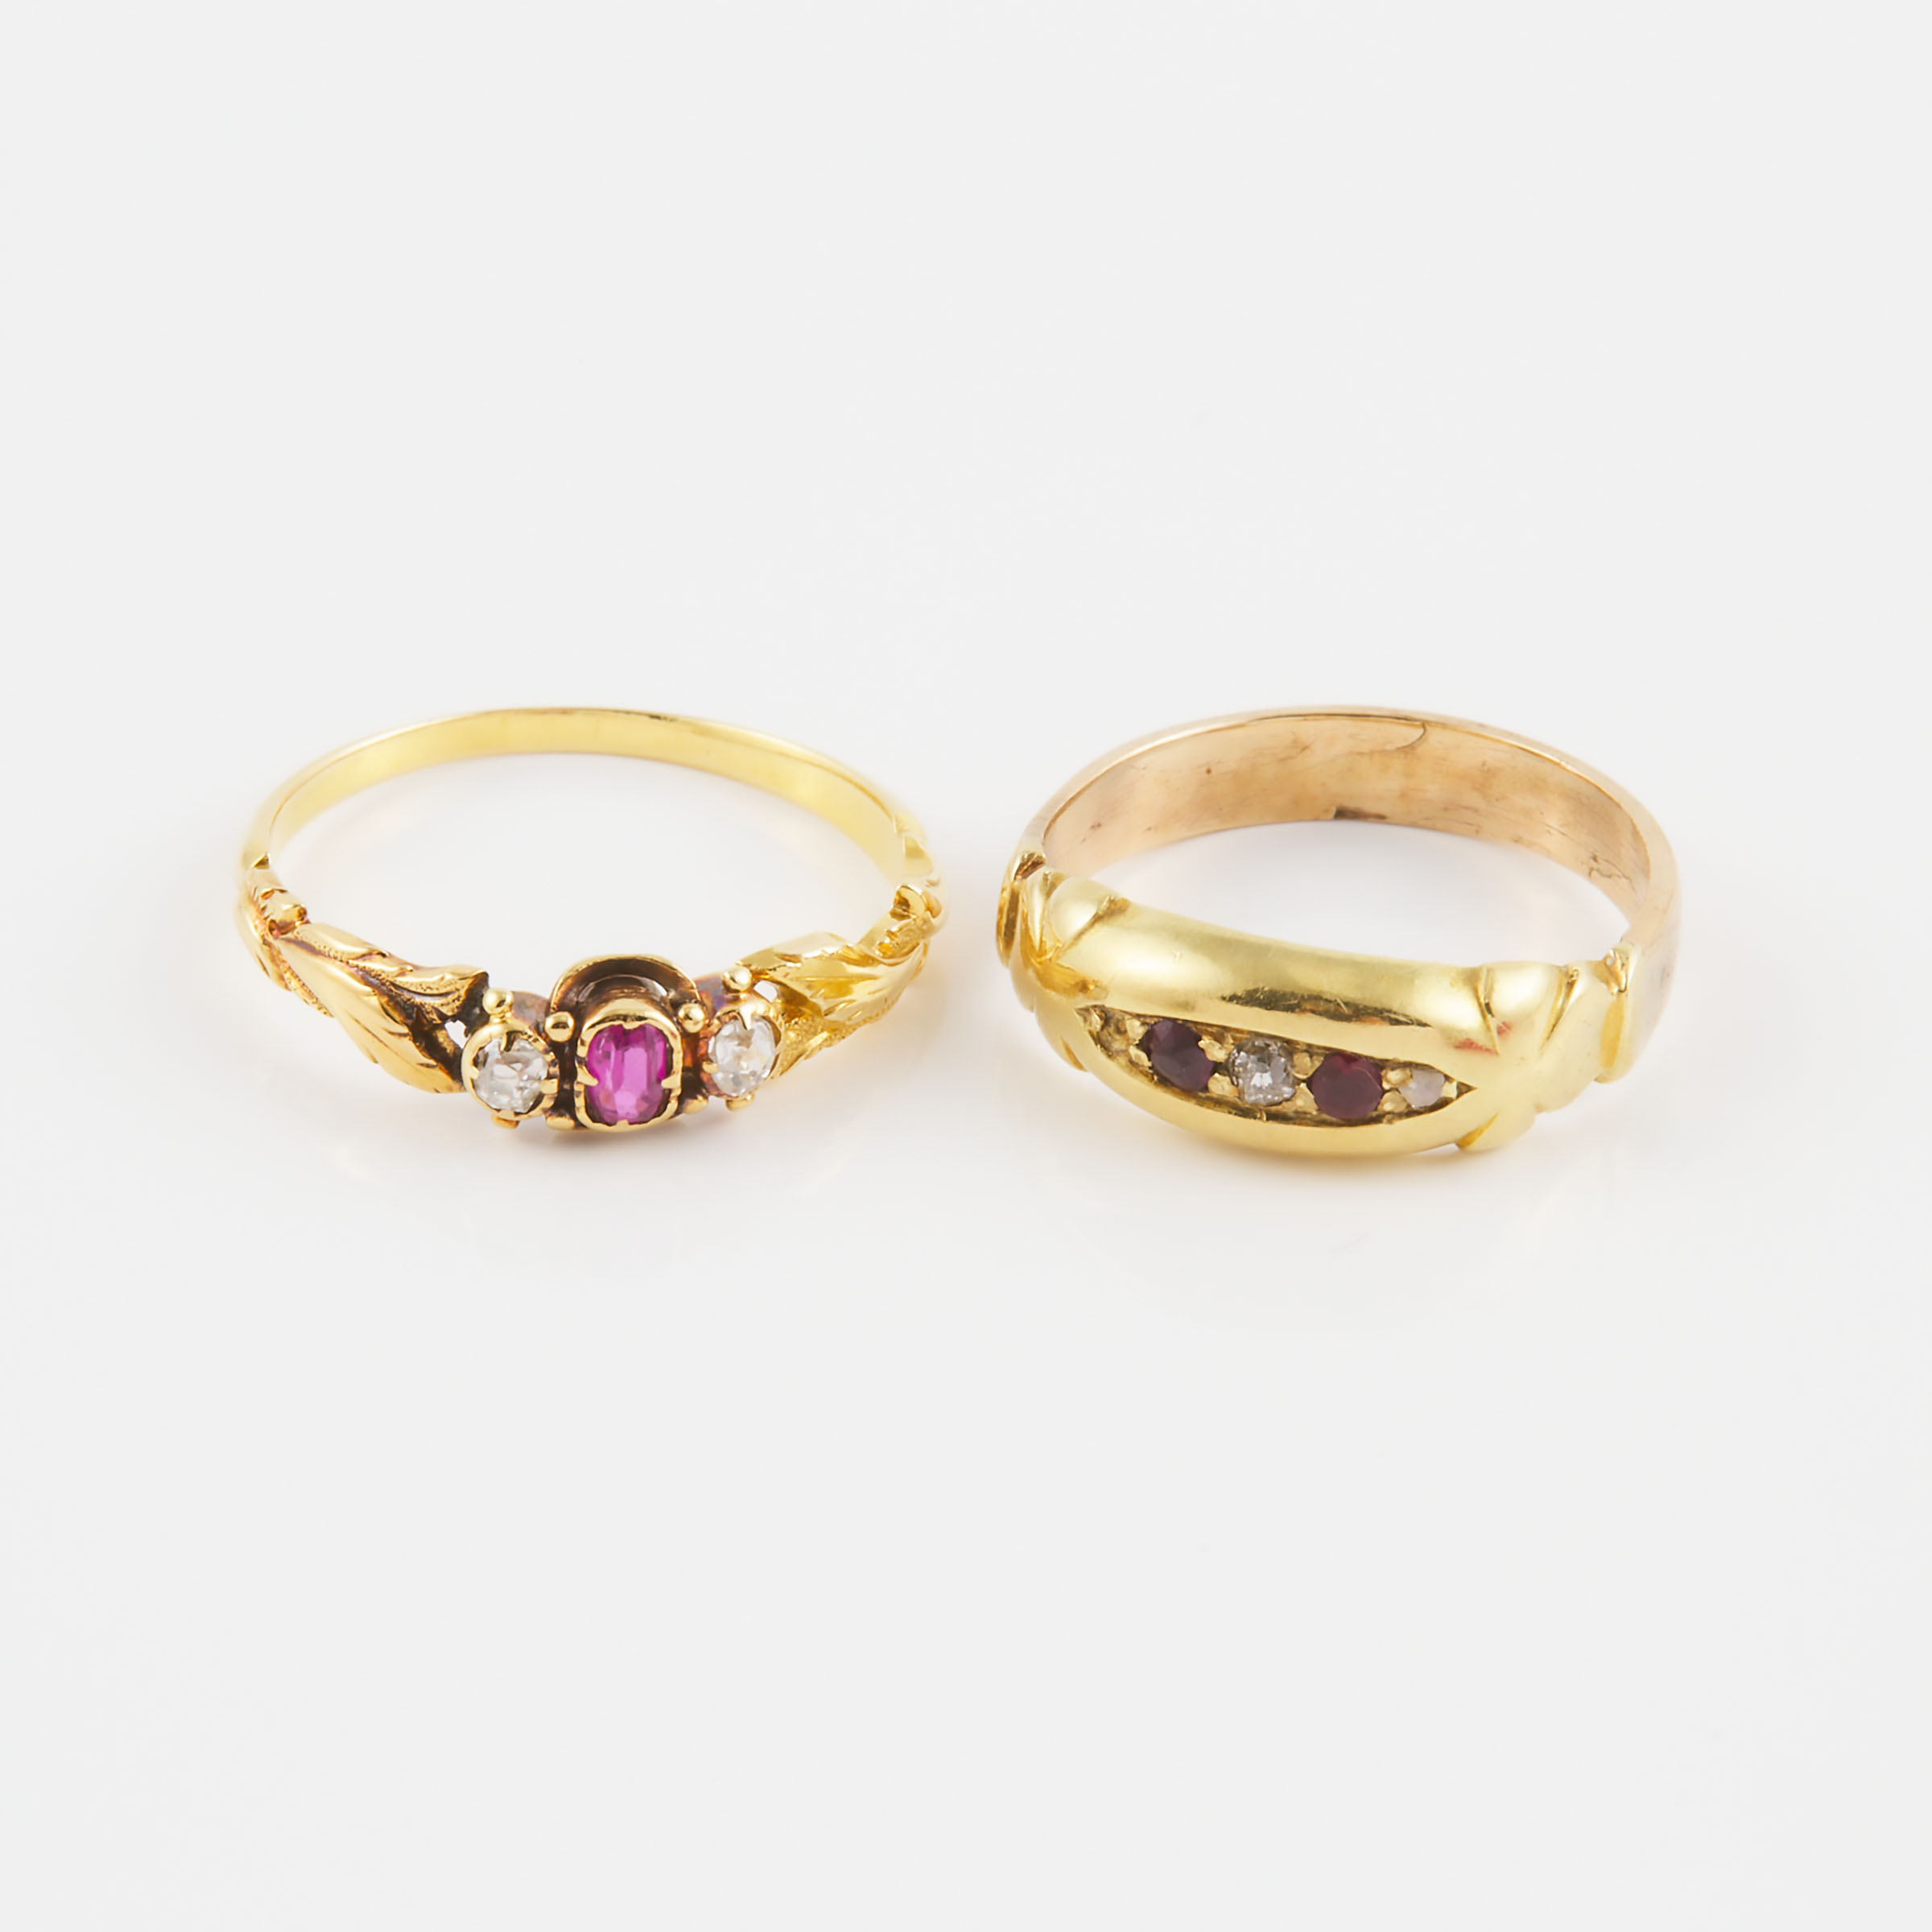 2 Yellow Gold Rings